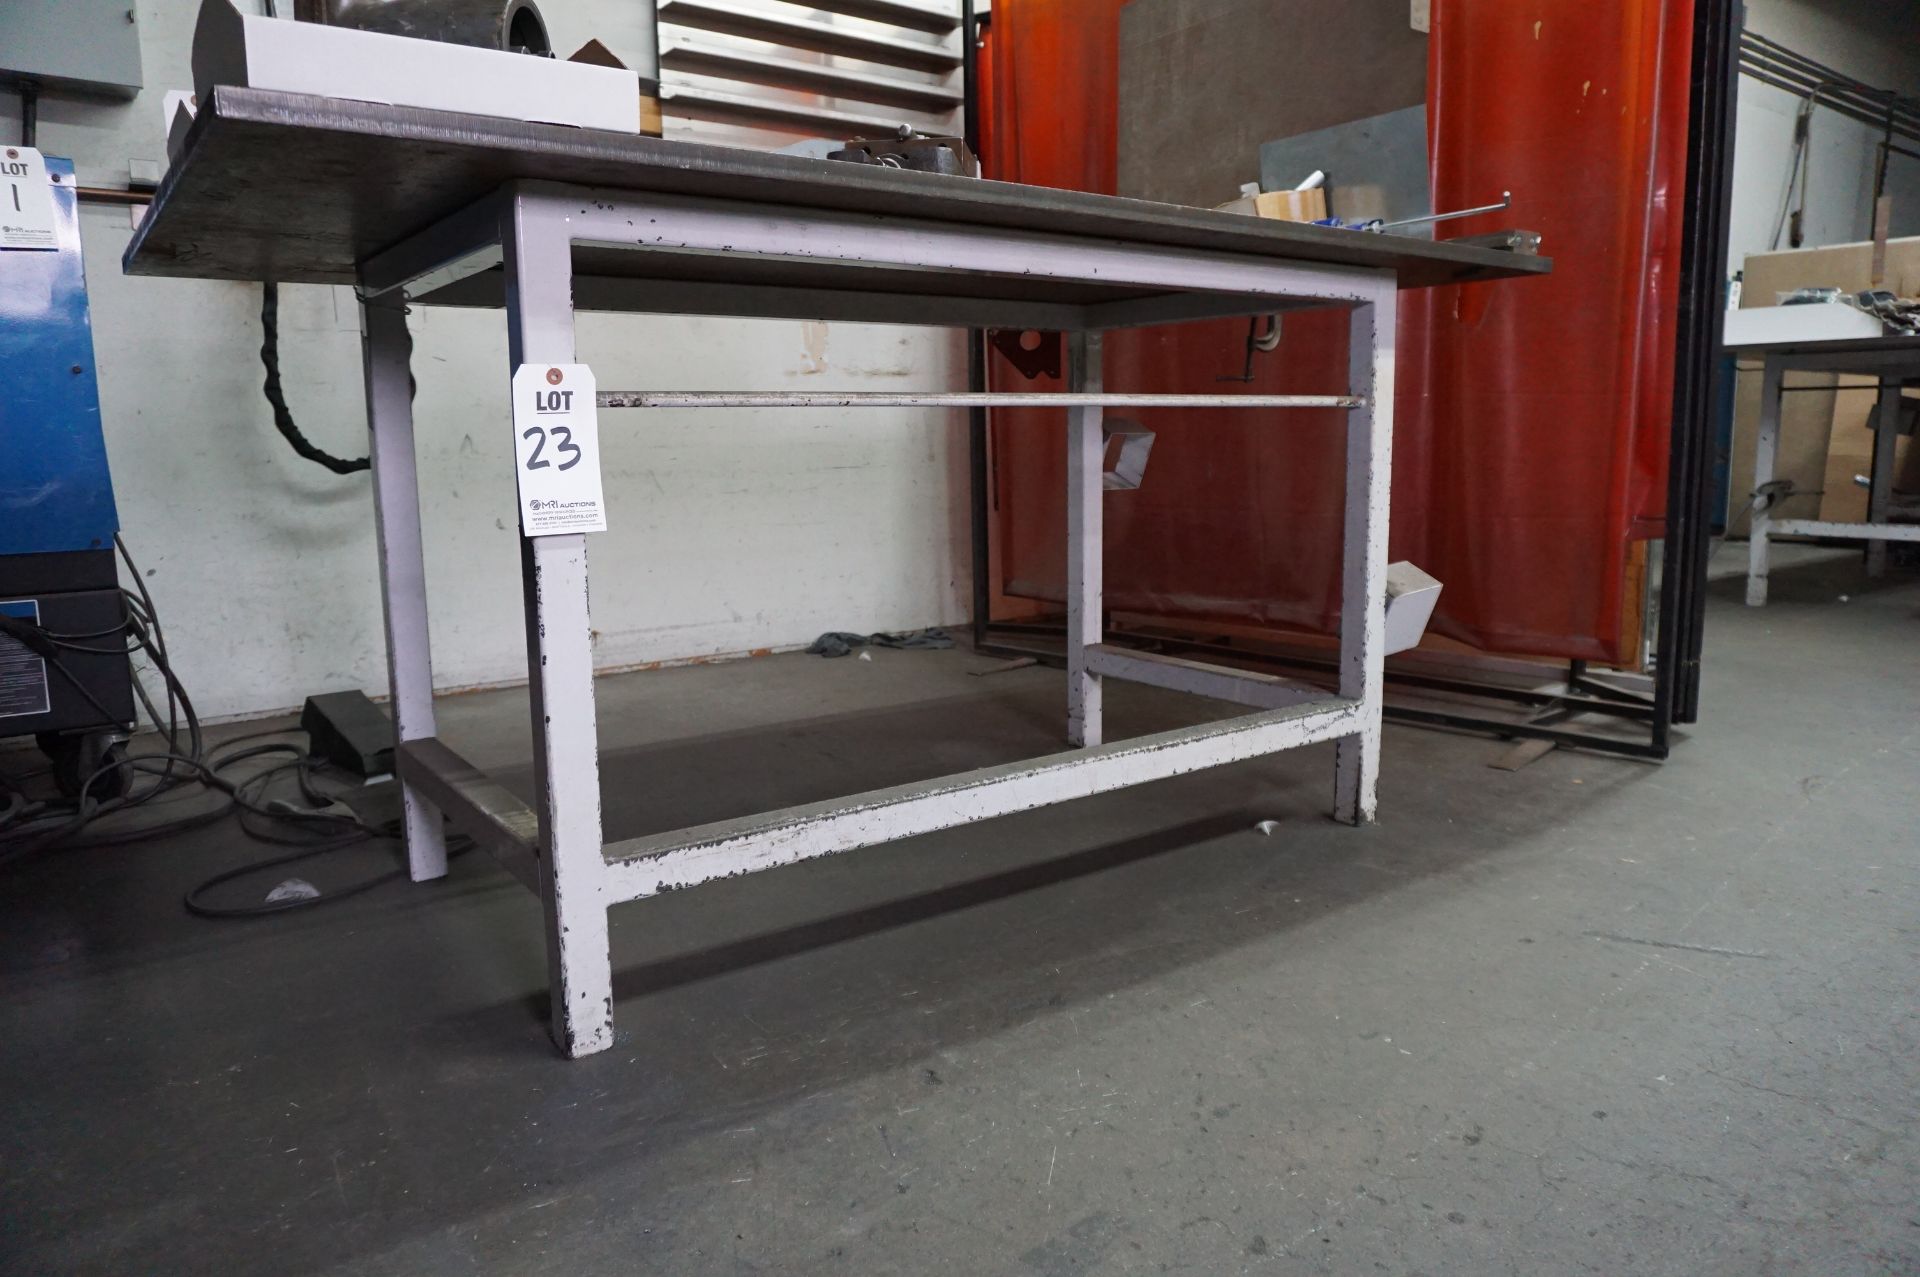 TABLE USED FOR TIG WELDING. 42" X 72" WORKING AREA, 1" THICK HEAVY STEEL TOP, 35" H, NO CONTENTS